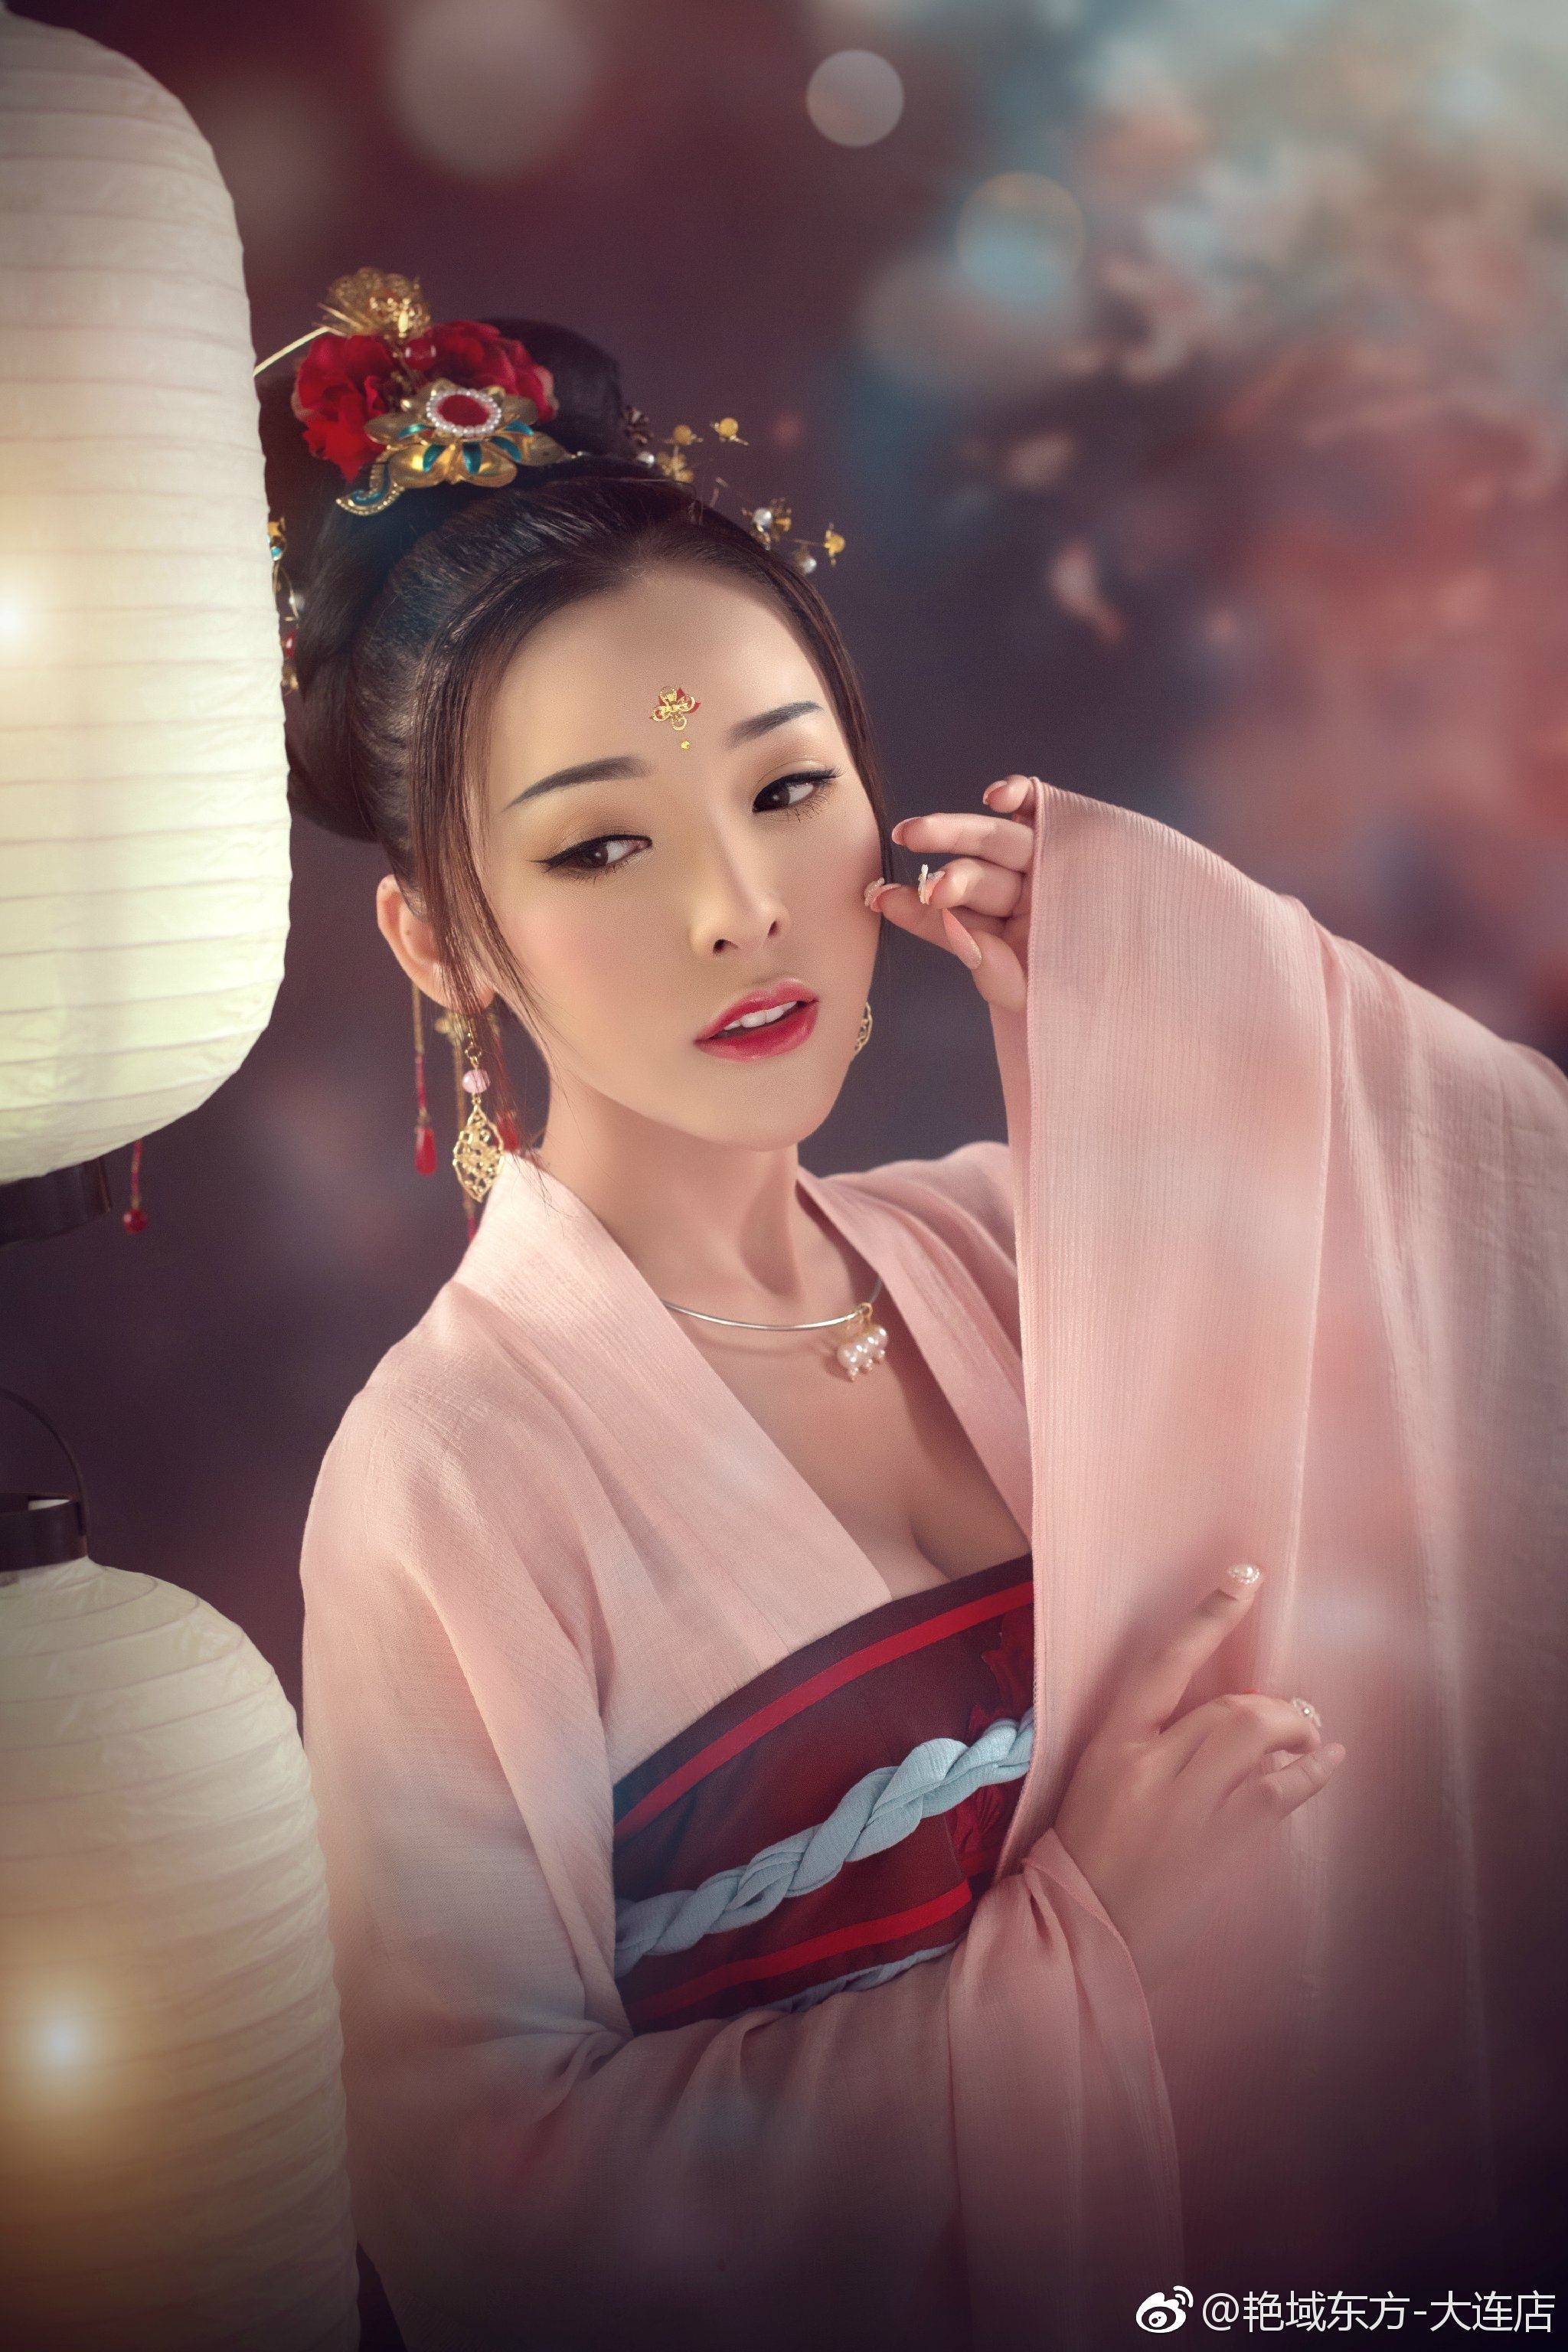 Pin by Ba Tu on cute Chinese | Pinterest | Hanfu, Cosplay and Asian